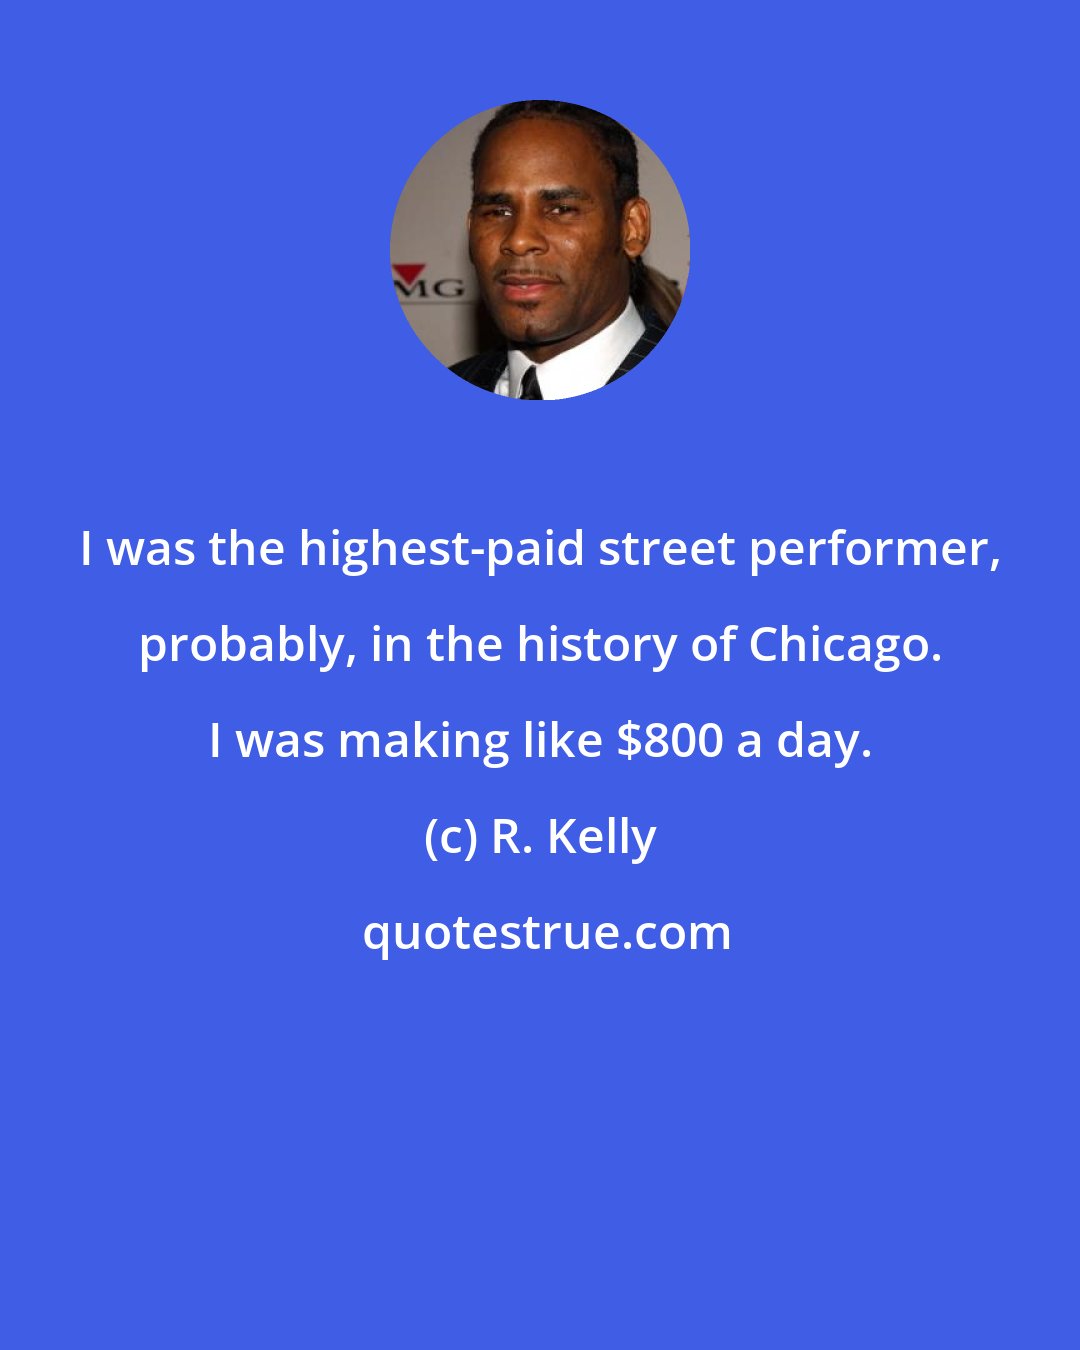 R. Kelly: I was the highest-paid street performer, probably, in the history of Chicago. I was making like $800 a day.